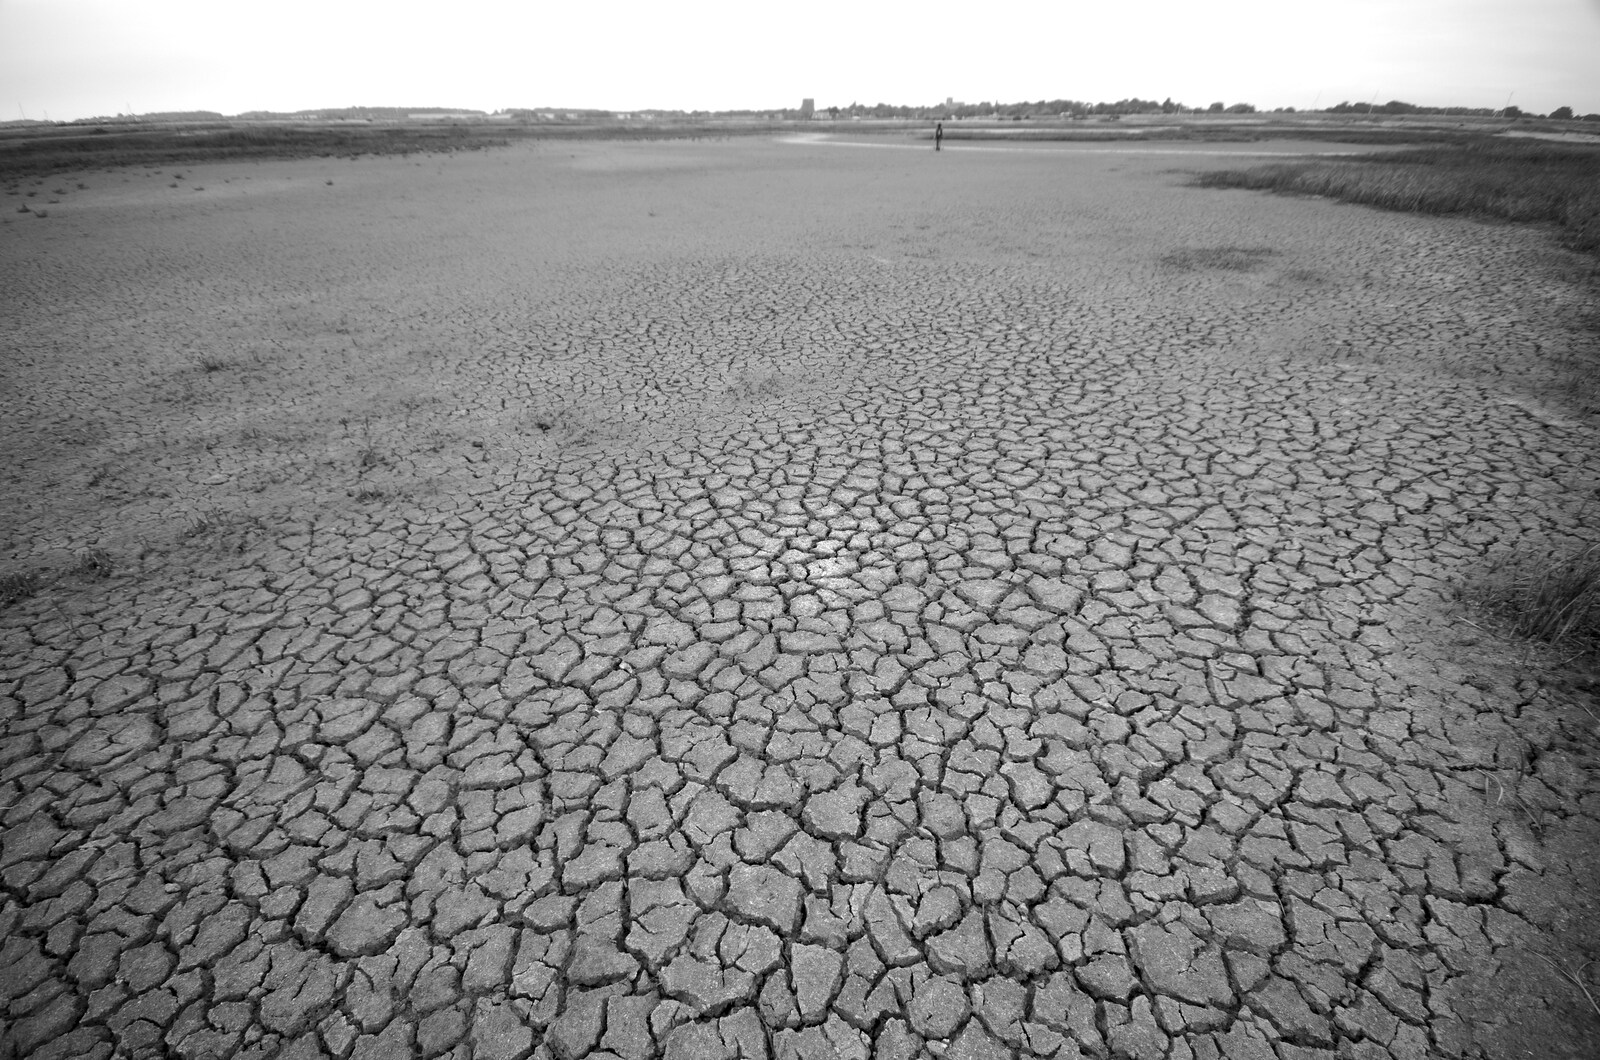 The cracked earth from A Trip to Orford Ness, Orford, Suffolk - 16th August 2022